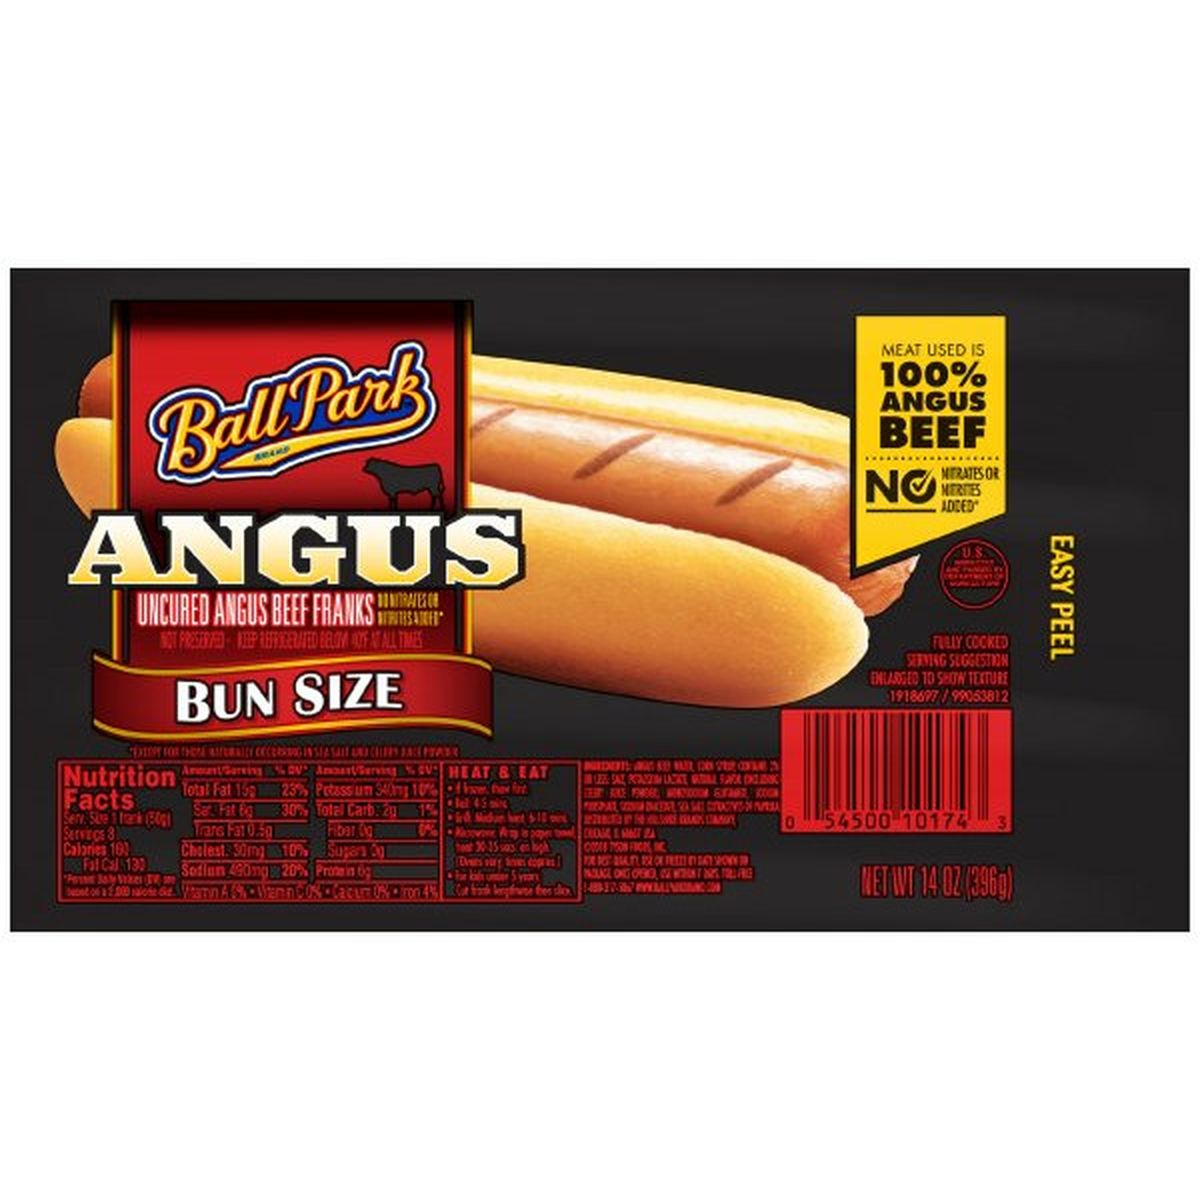 Calories in Ball Park Angus Beef Hot Dogs, Bun Size